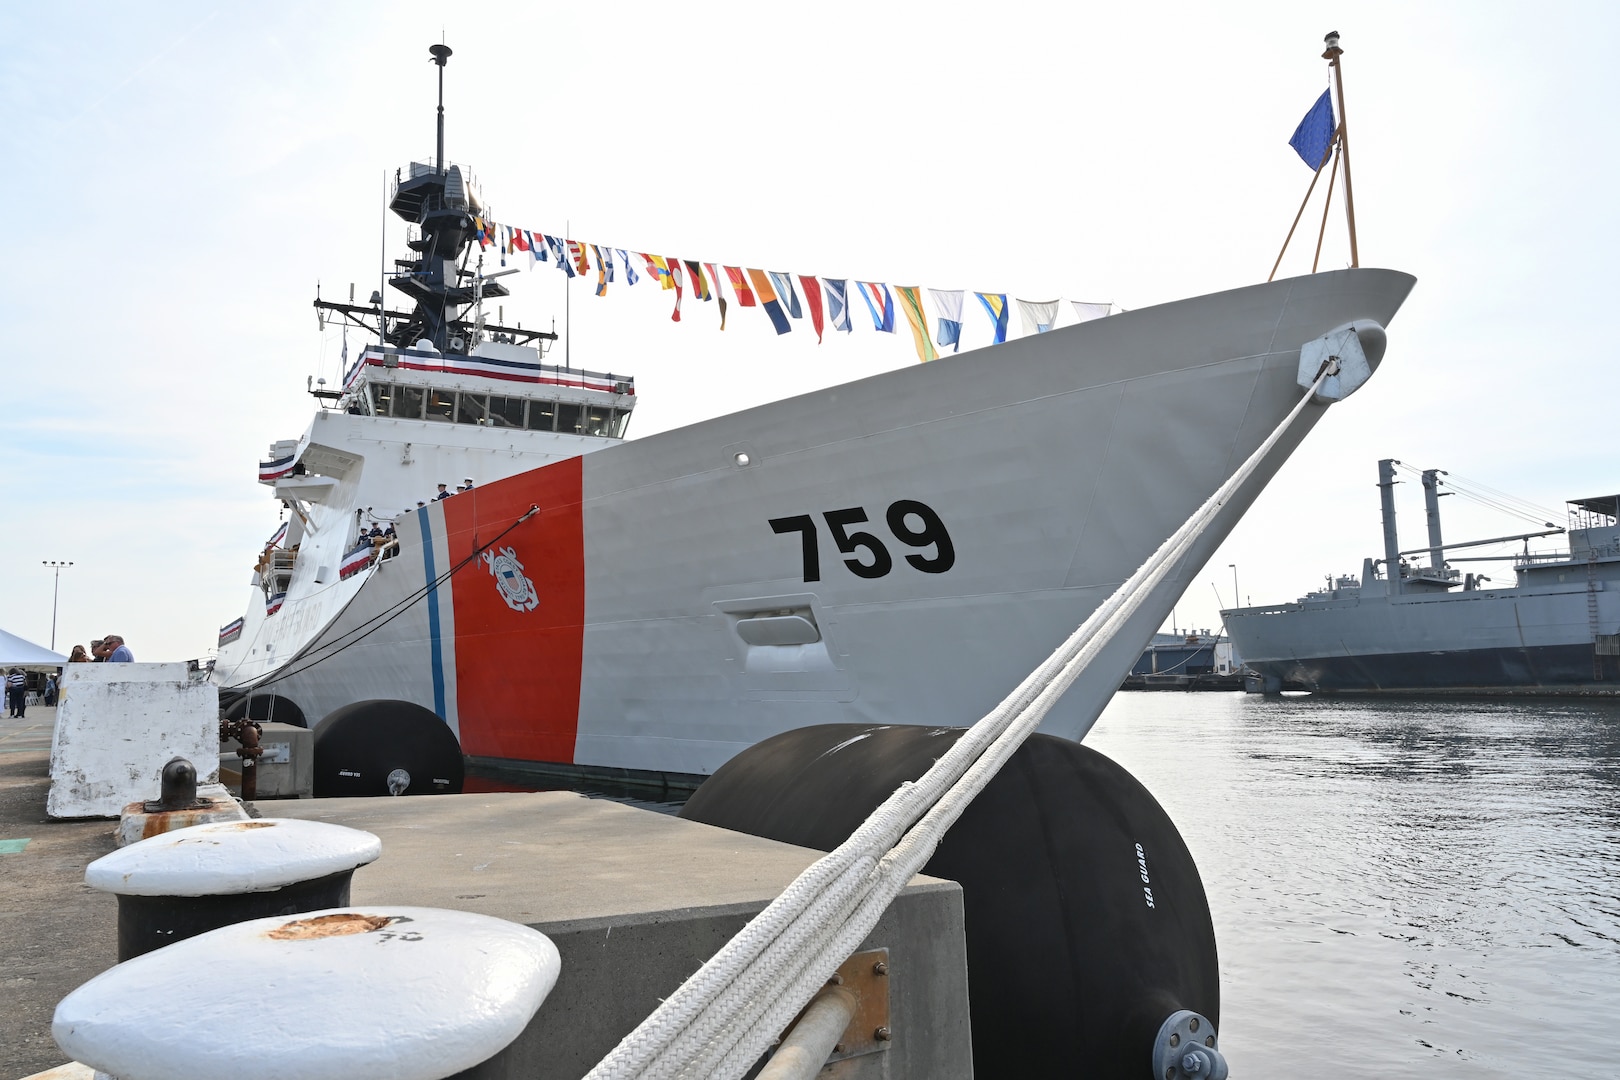 The U.S. Coast Guard Cutter Calhoun (WMSL 759) is moored to the pier on the morning of its commissioning ceremony, April 20, 2024, in North Charleston, South Carolina. The Calhoun, which is named for the first Master Chief Petty Officer of the Coast Guard, Charles Calhoun, was commissioned into service as the 10th National Security Cutter. (U.S. Coast Guard photo by Petty Officer 2nd Class Brandon Hillard)